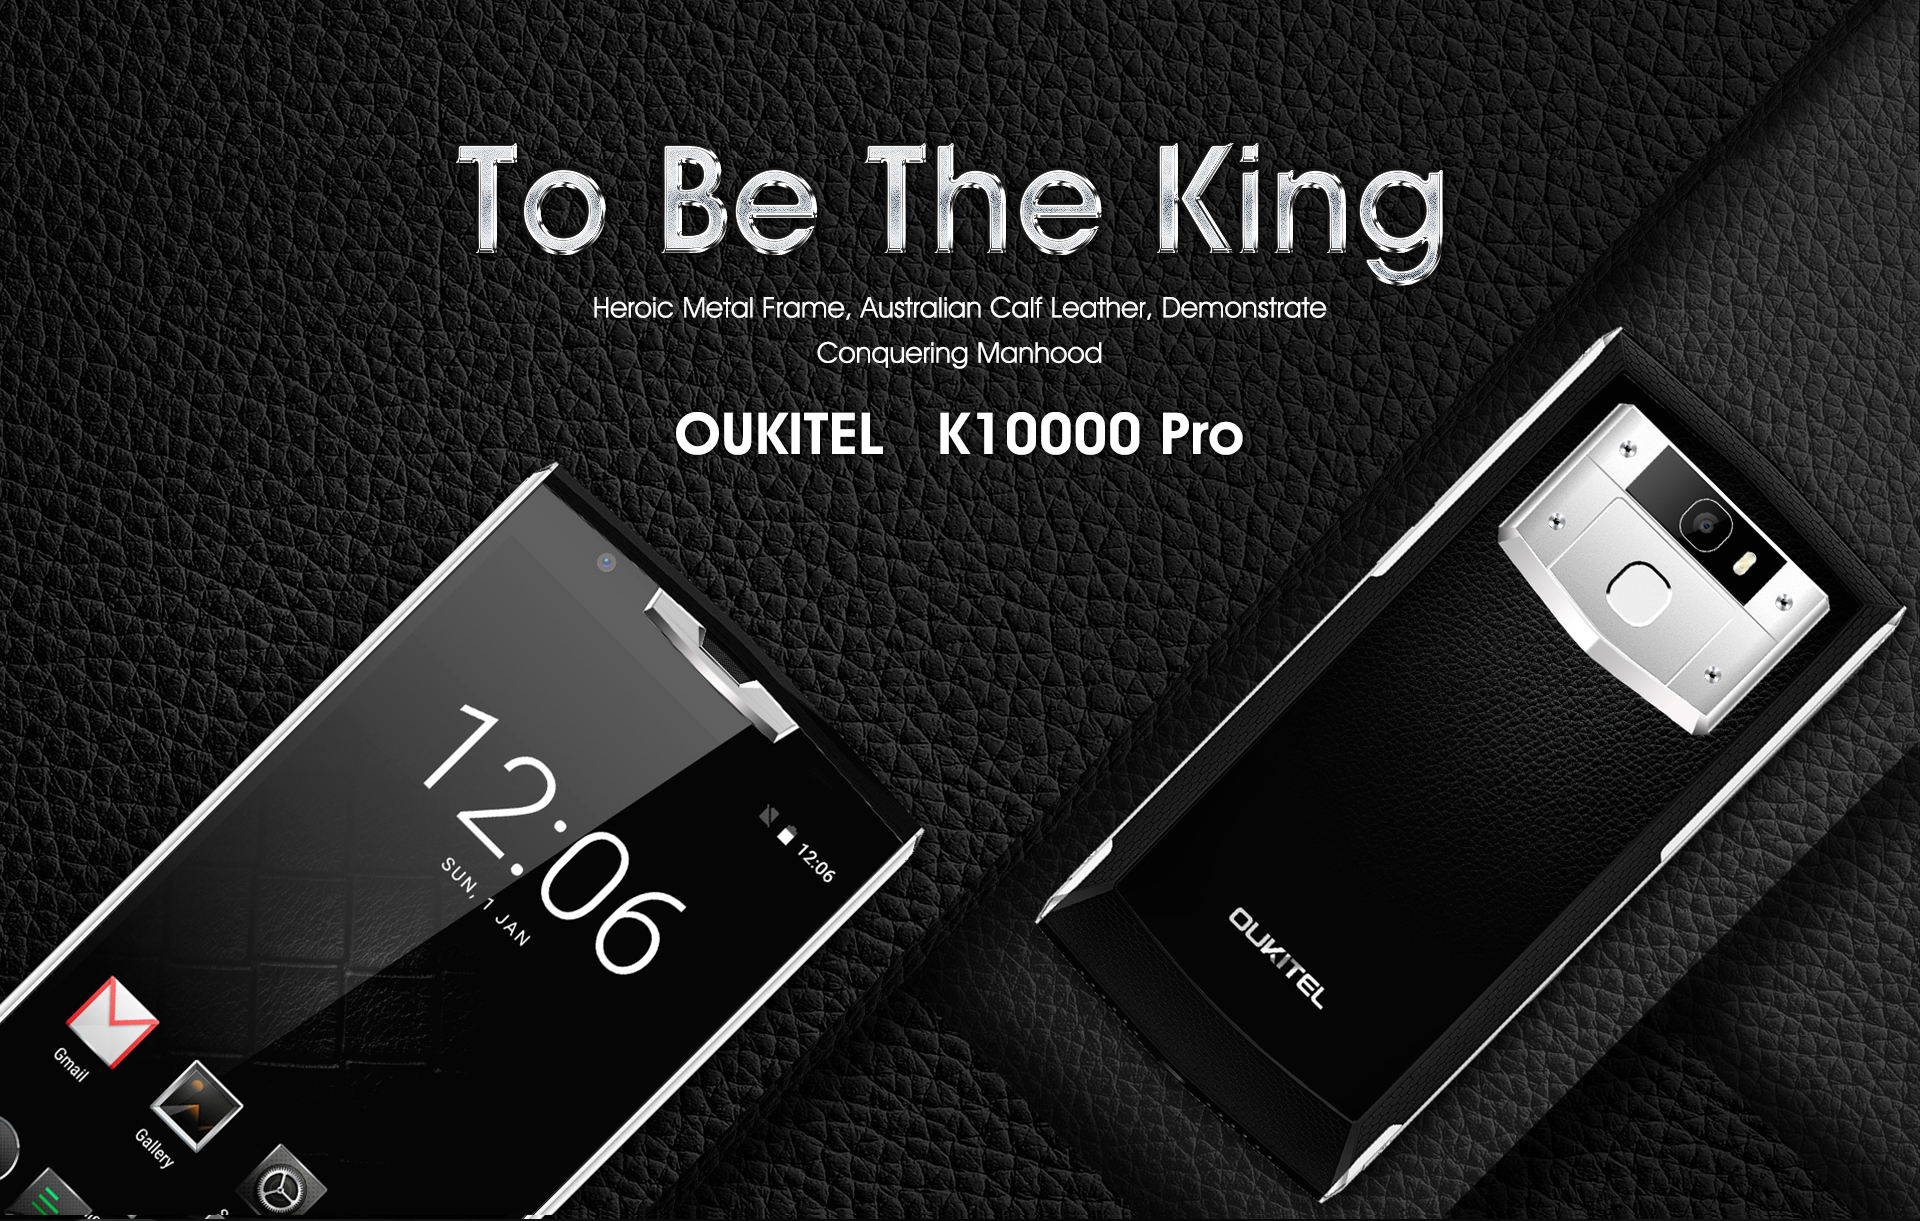 New details about the battery OUKITEL K10000 Pro (+contest)